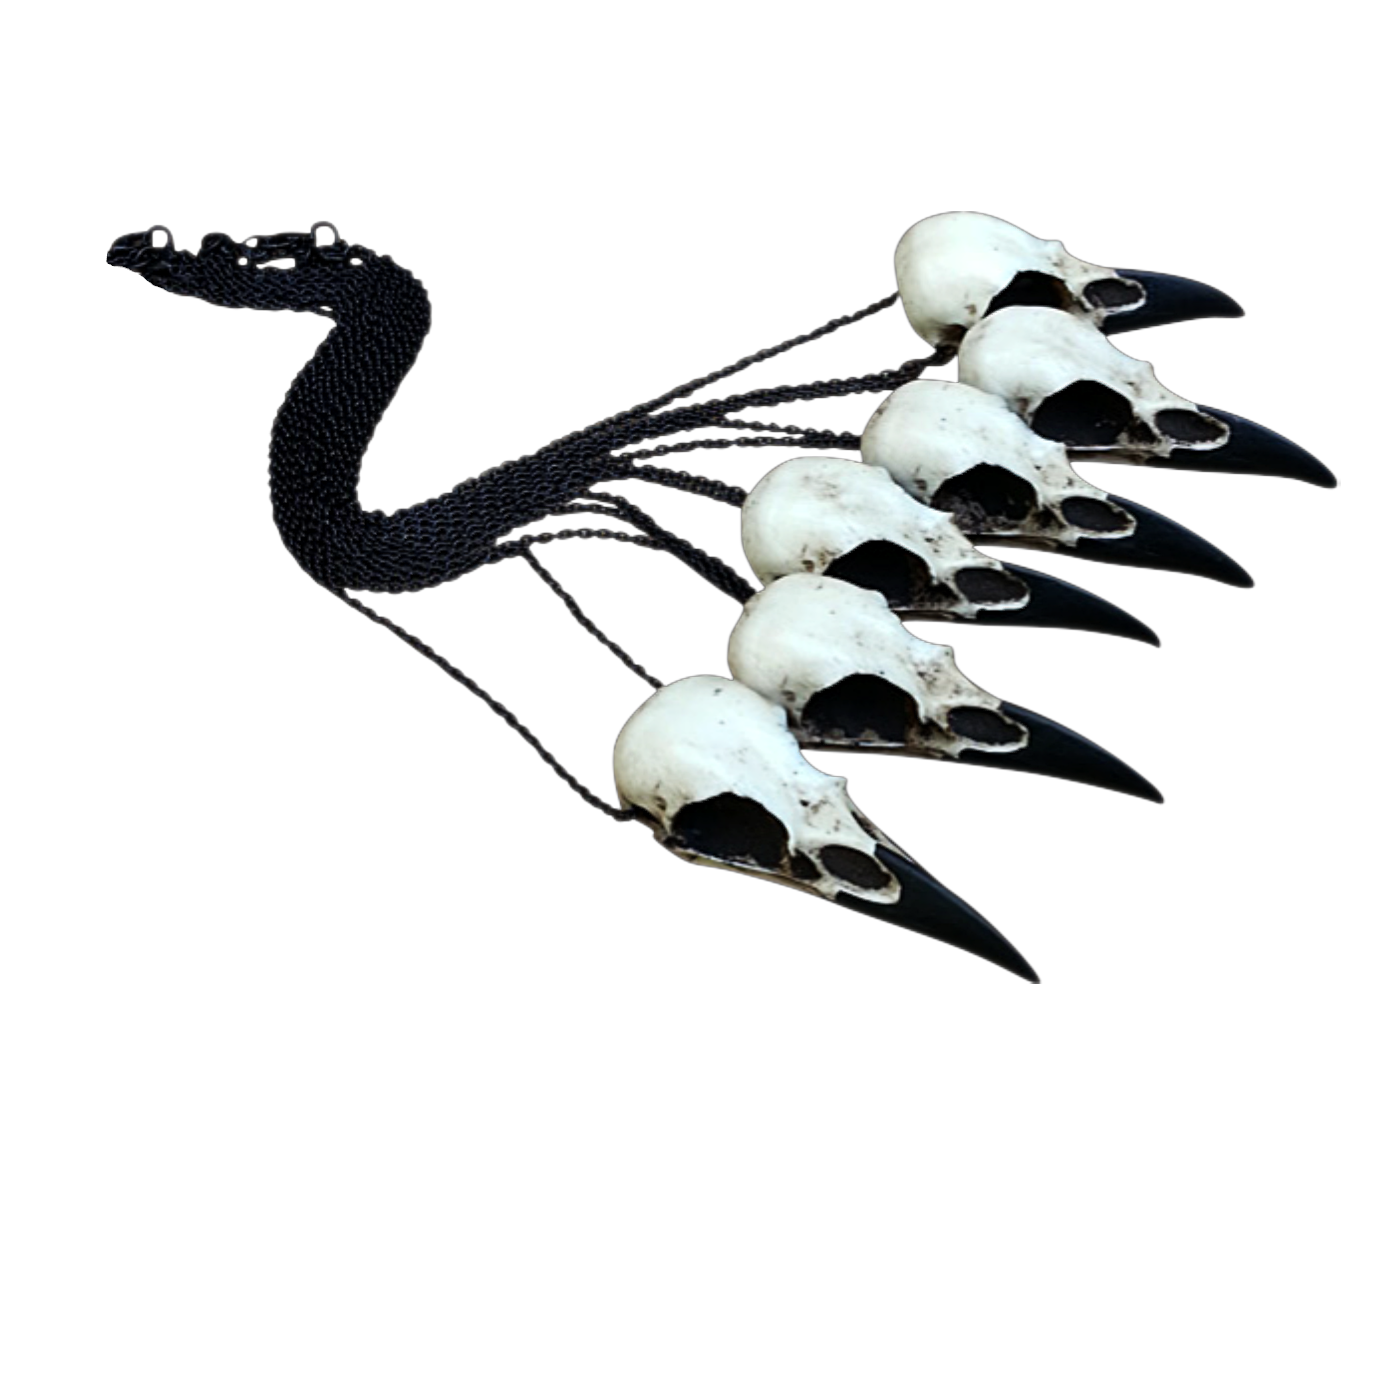 six raven skull bone jewelry necklaces with black chains made by Raven Ranch Studio